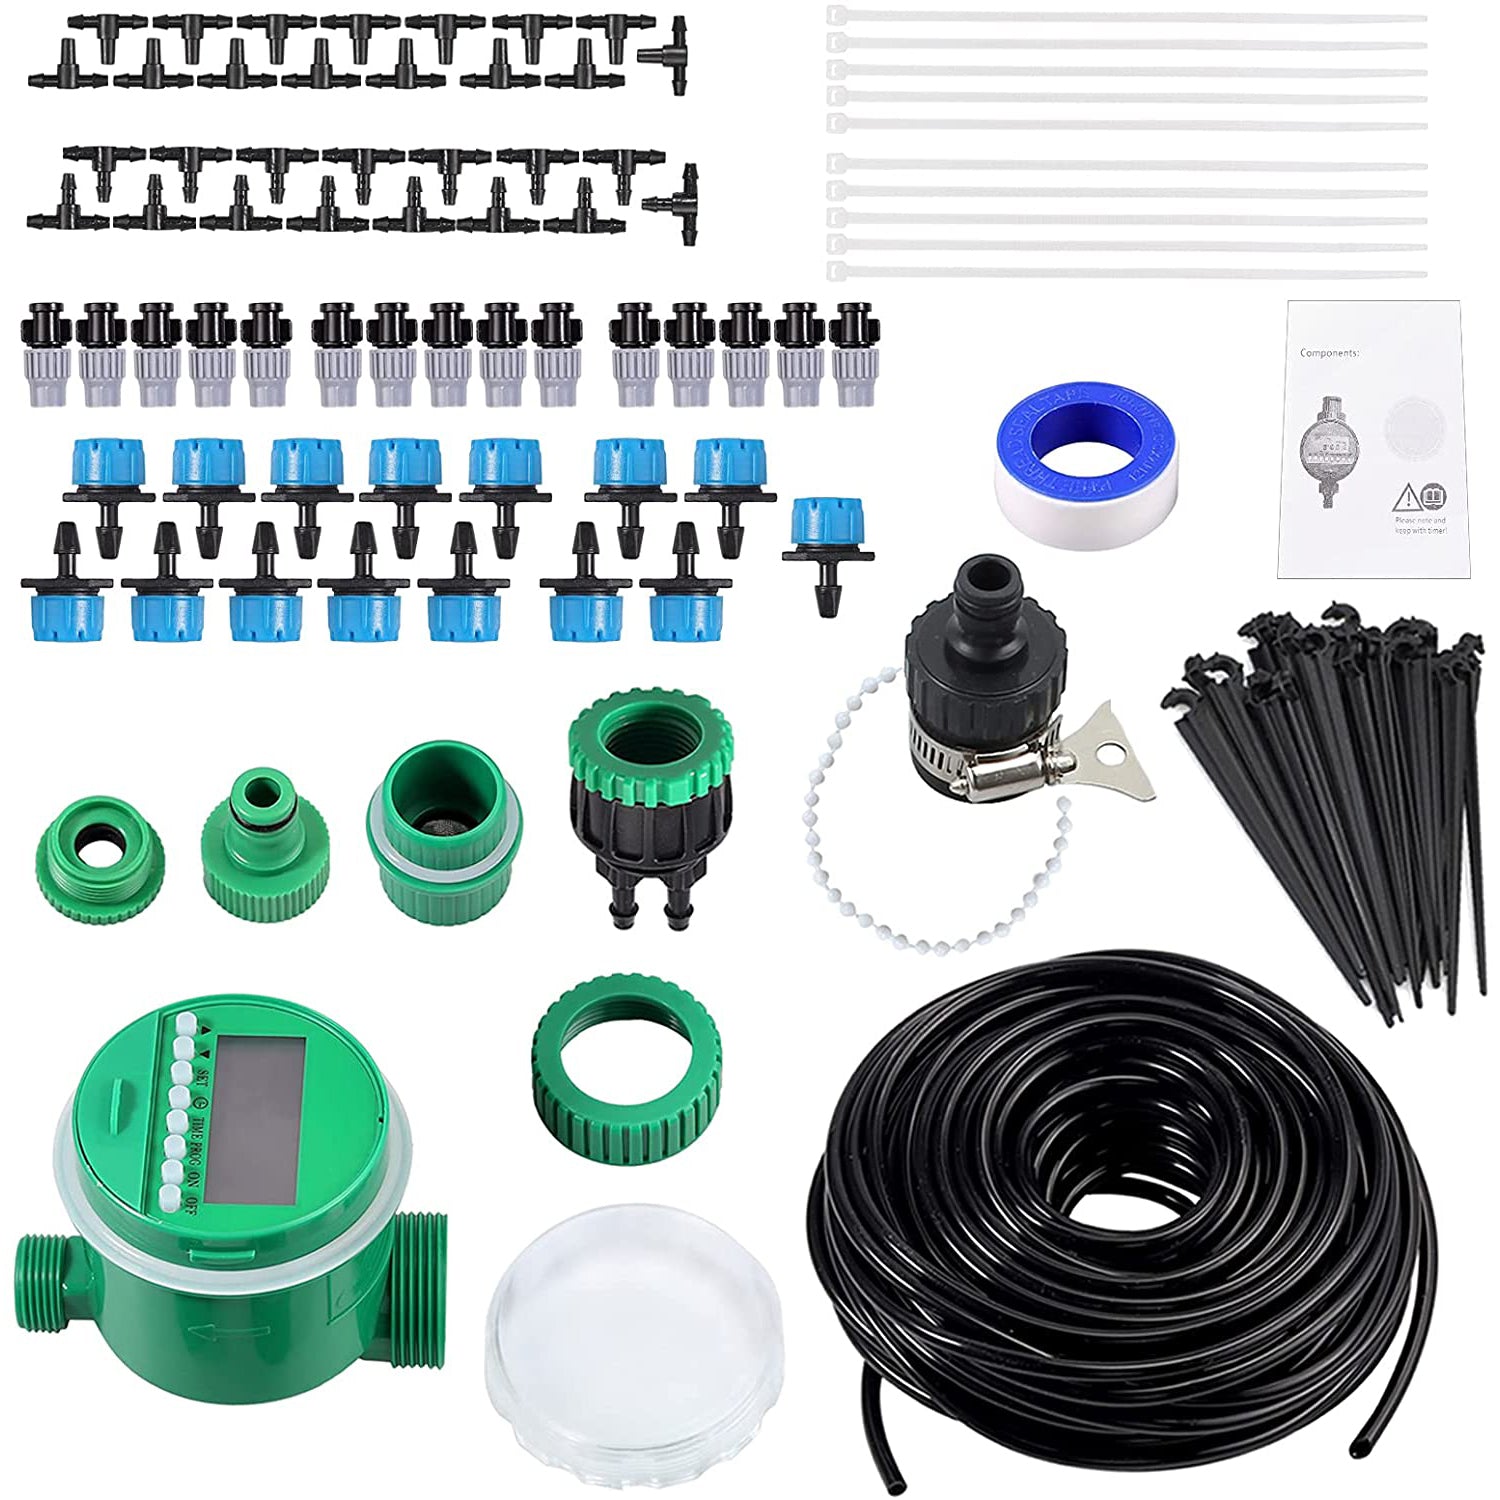 Proster 25M/82ft 4mm Irrigation System intellectual